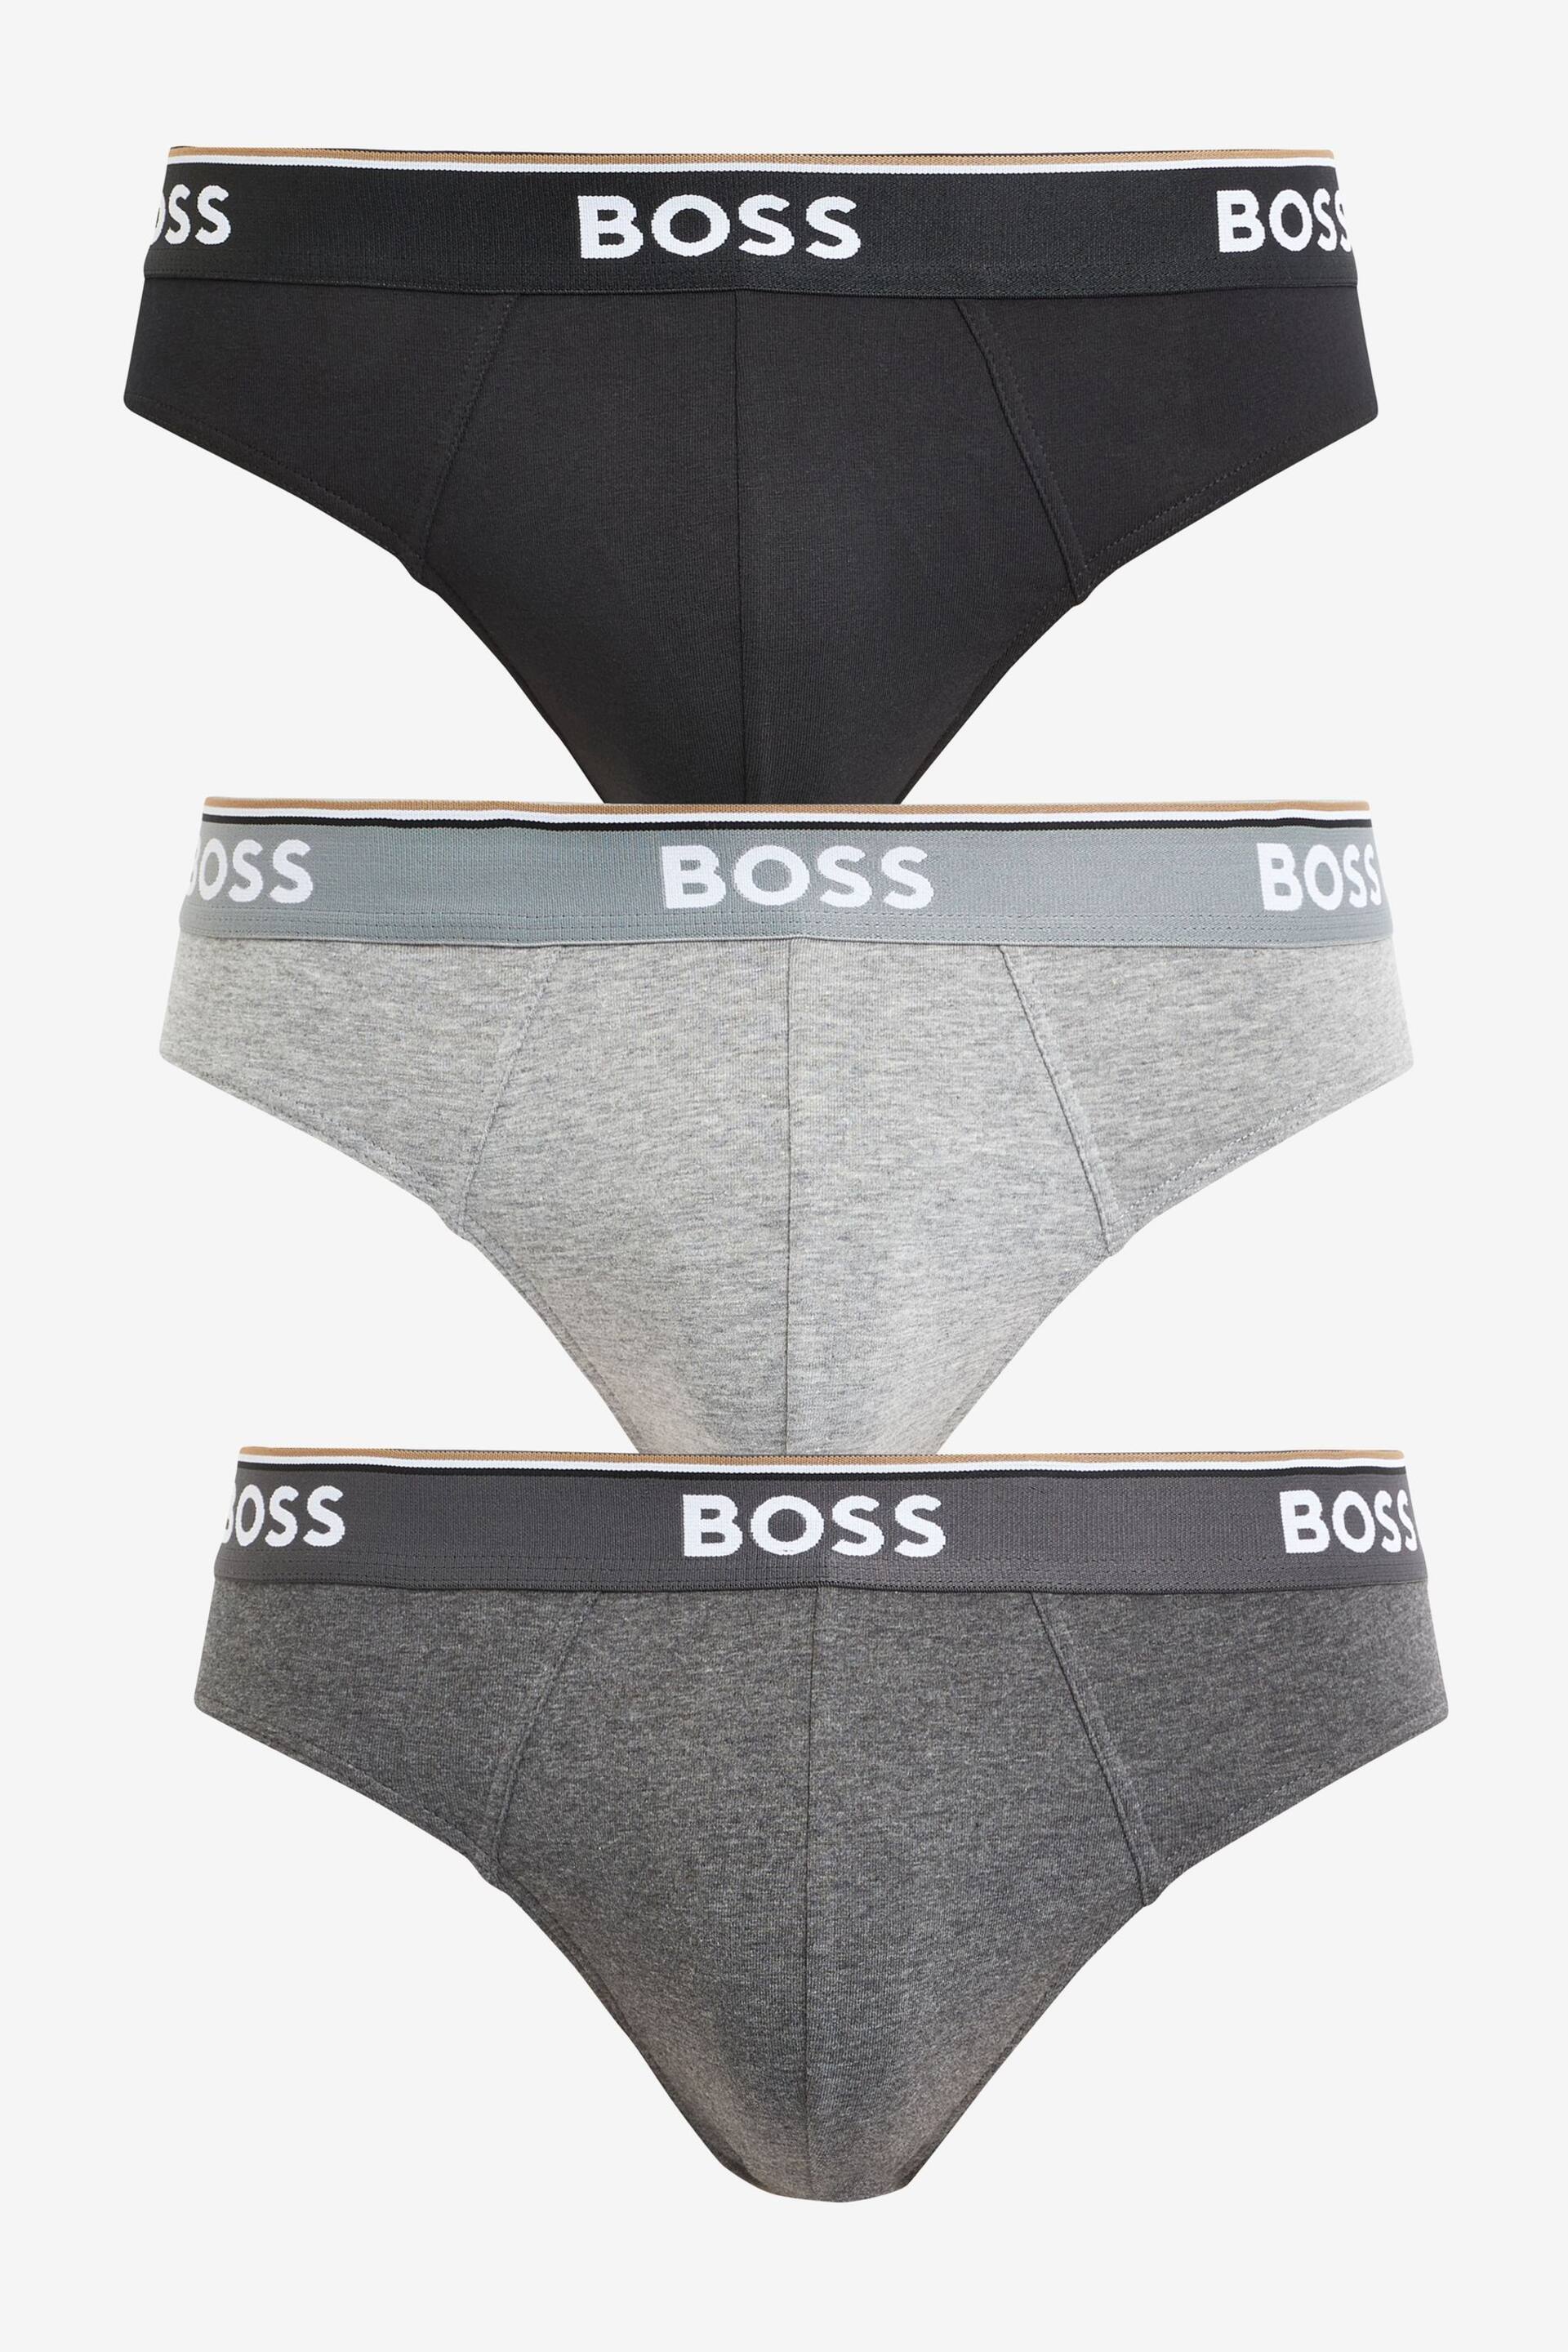 BOSS Grey Power Briefs 3 Pack - Image 1 of 9